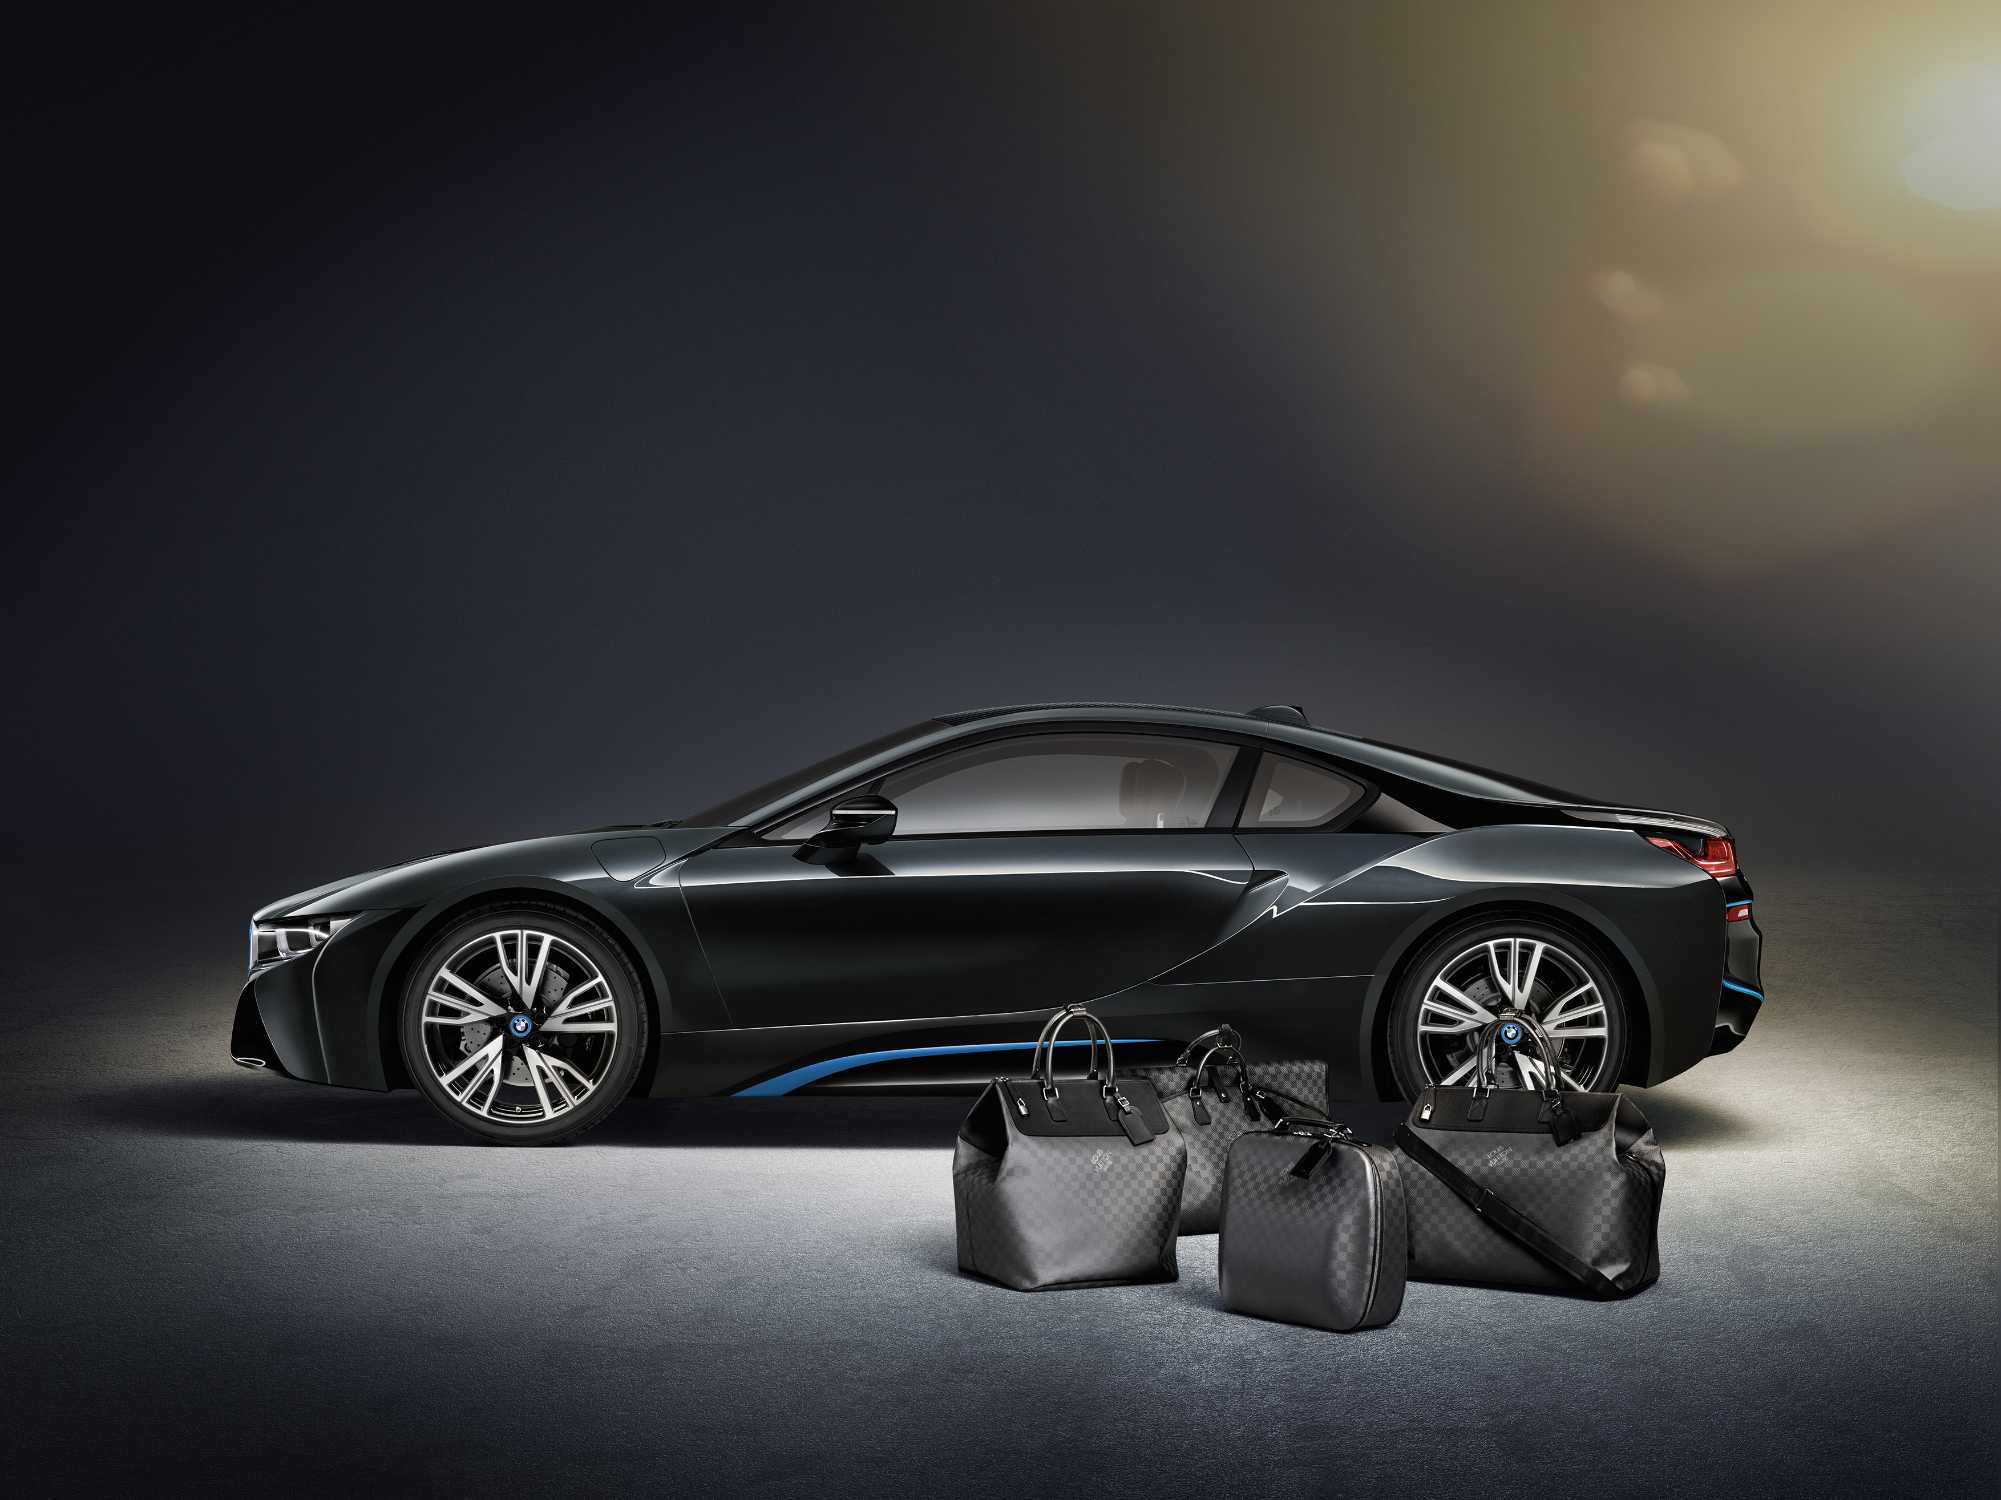 The tailor-made Louis Vuitton luggage set for the BMW i8 made from carbon  fibre: Big “Weekender GM i8“. (08/2014)